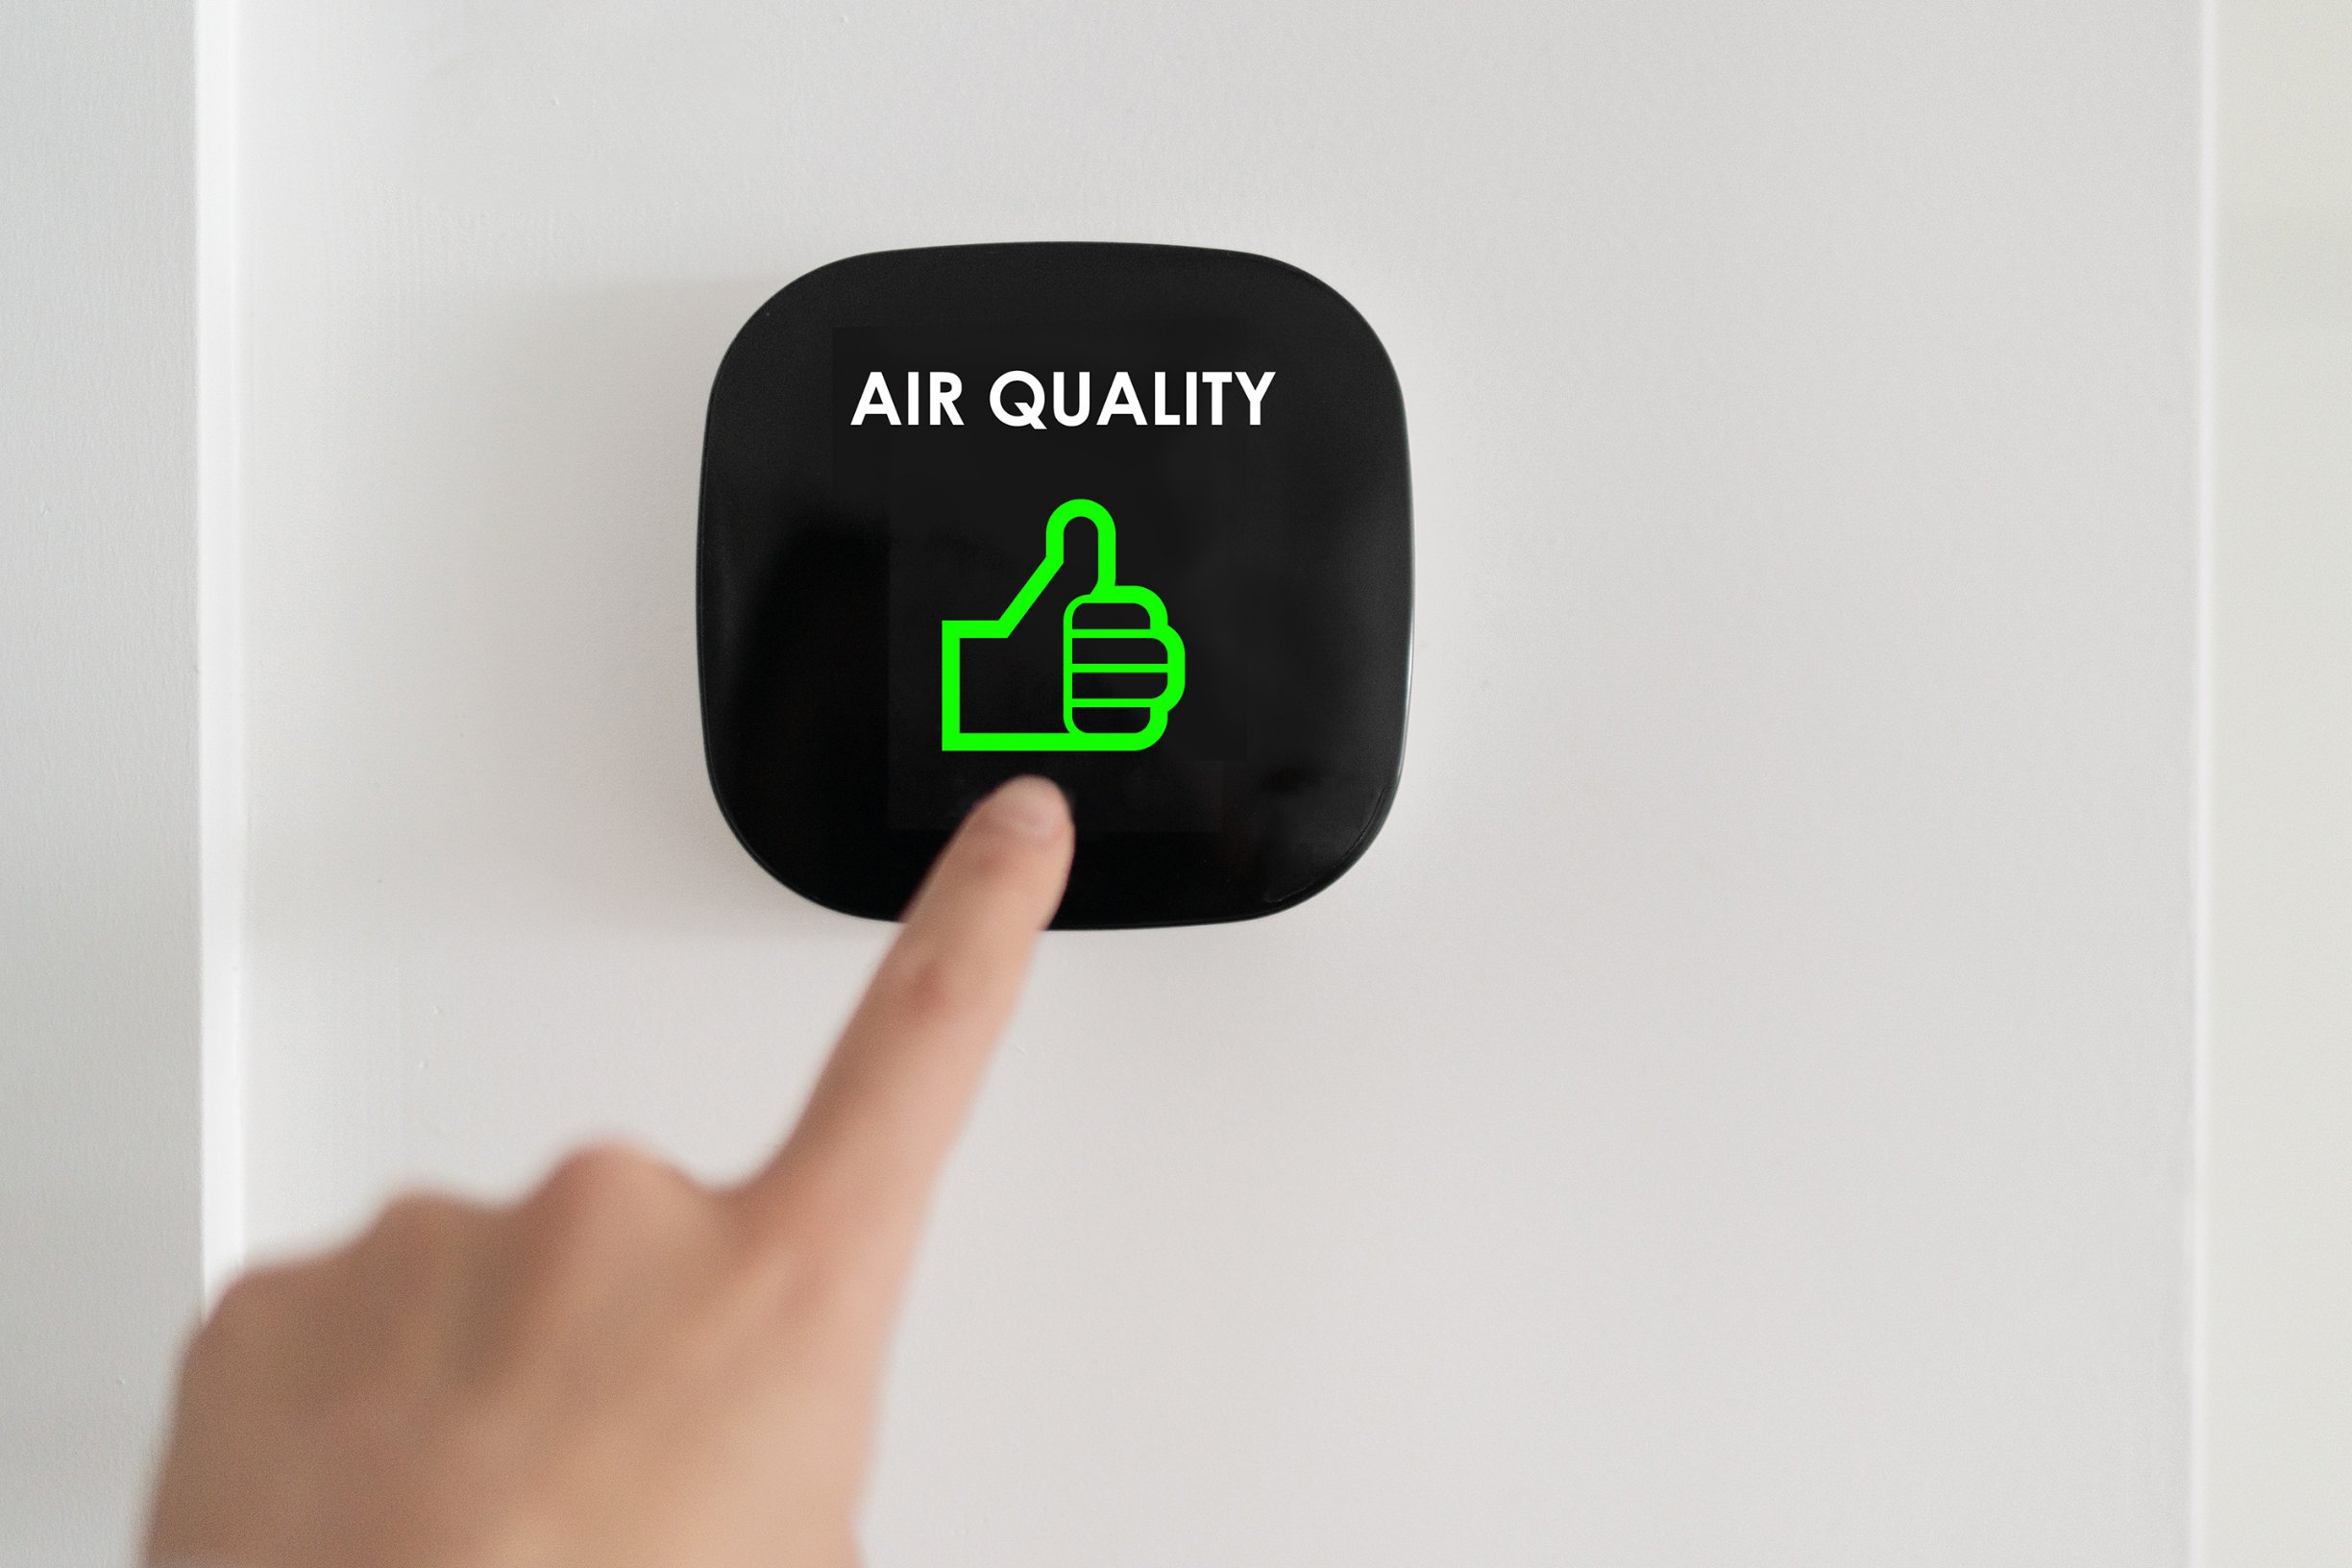 4 tips for improving air quality at home